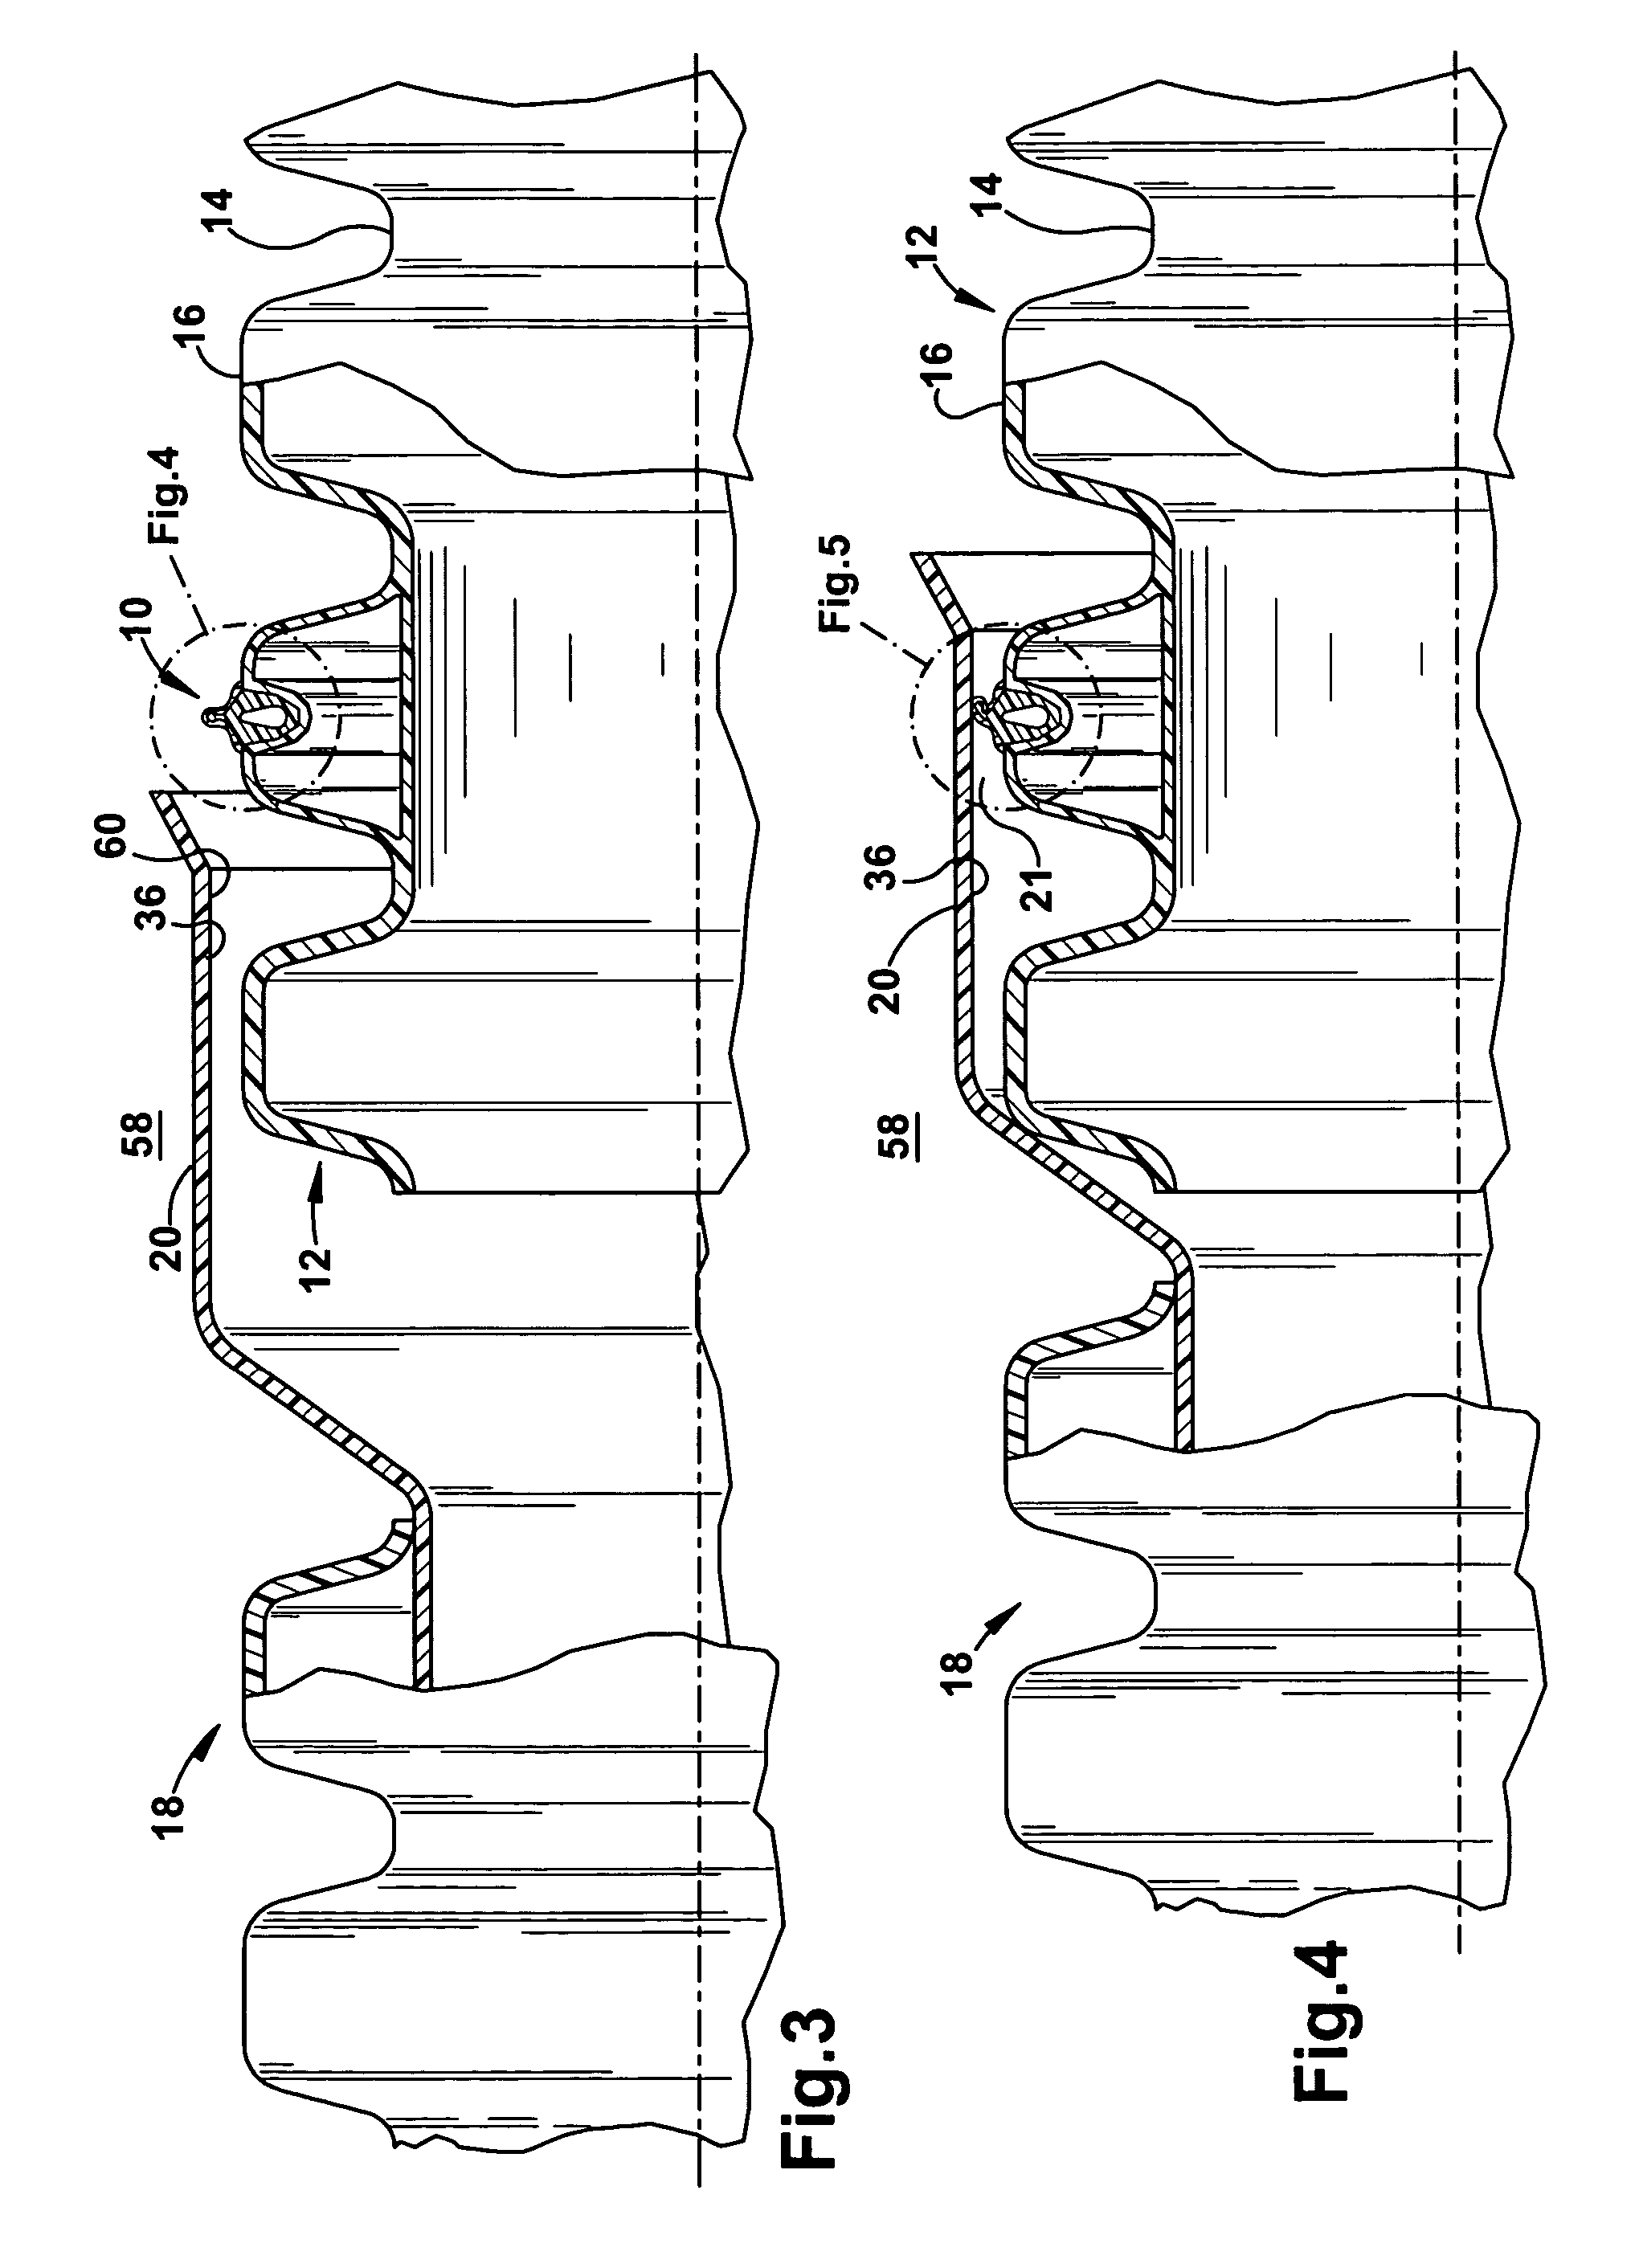 Permanently lubricated film gasket and method of manufacture